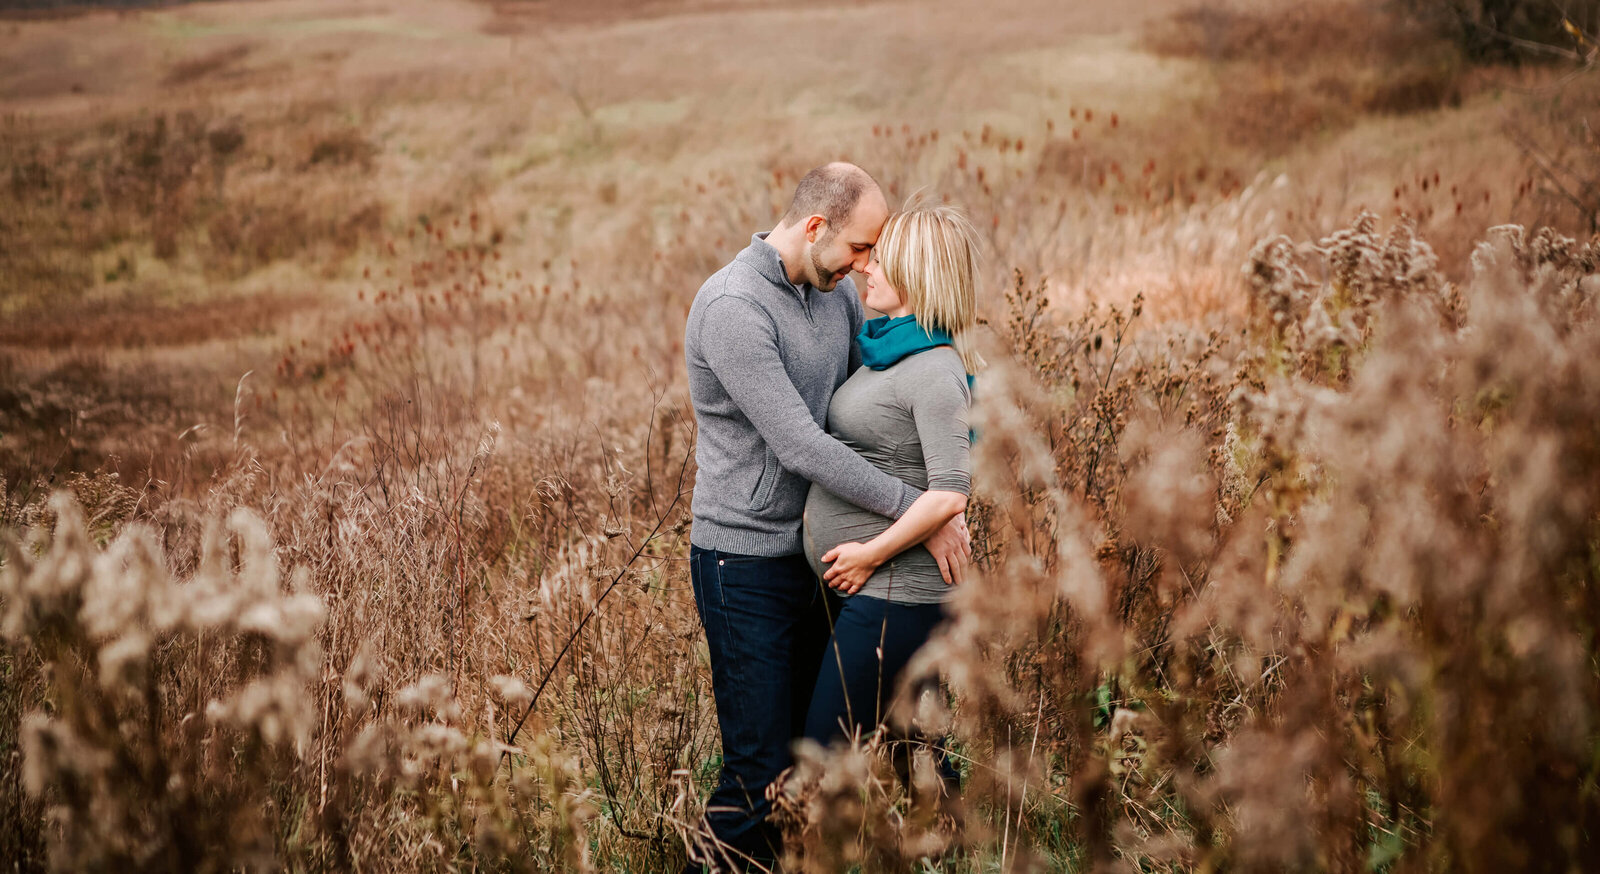 Husband and white rest their heads on each other during her maternity session.